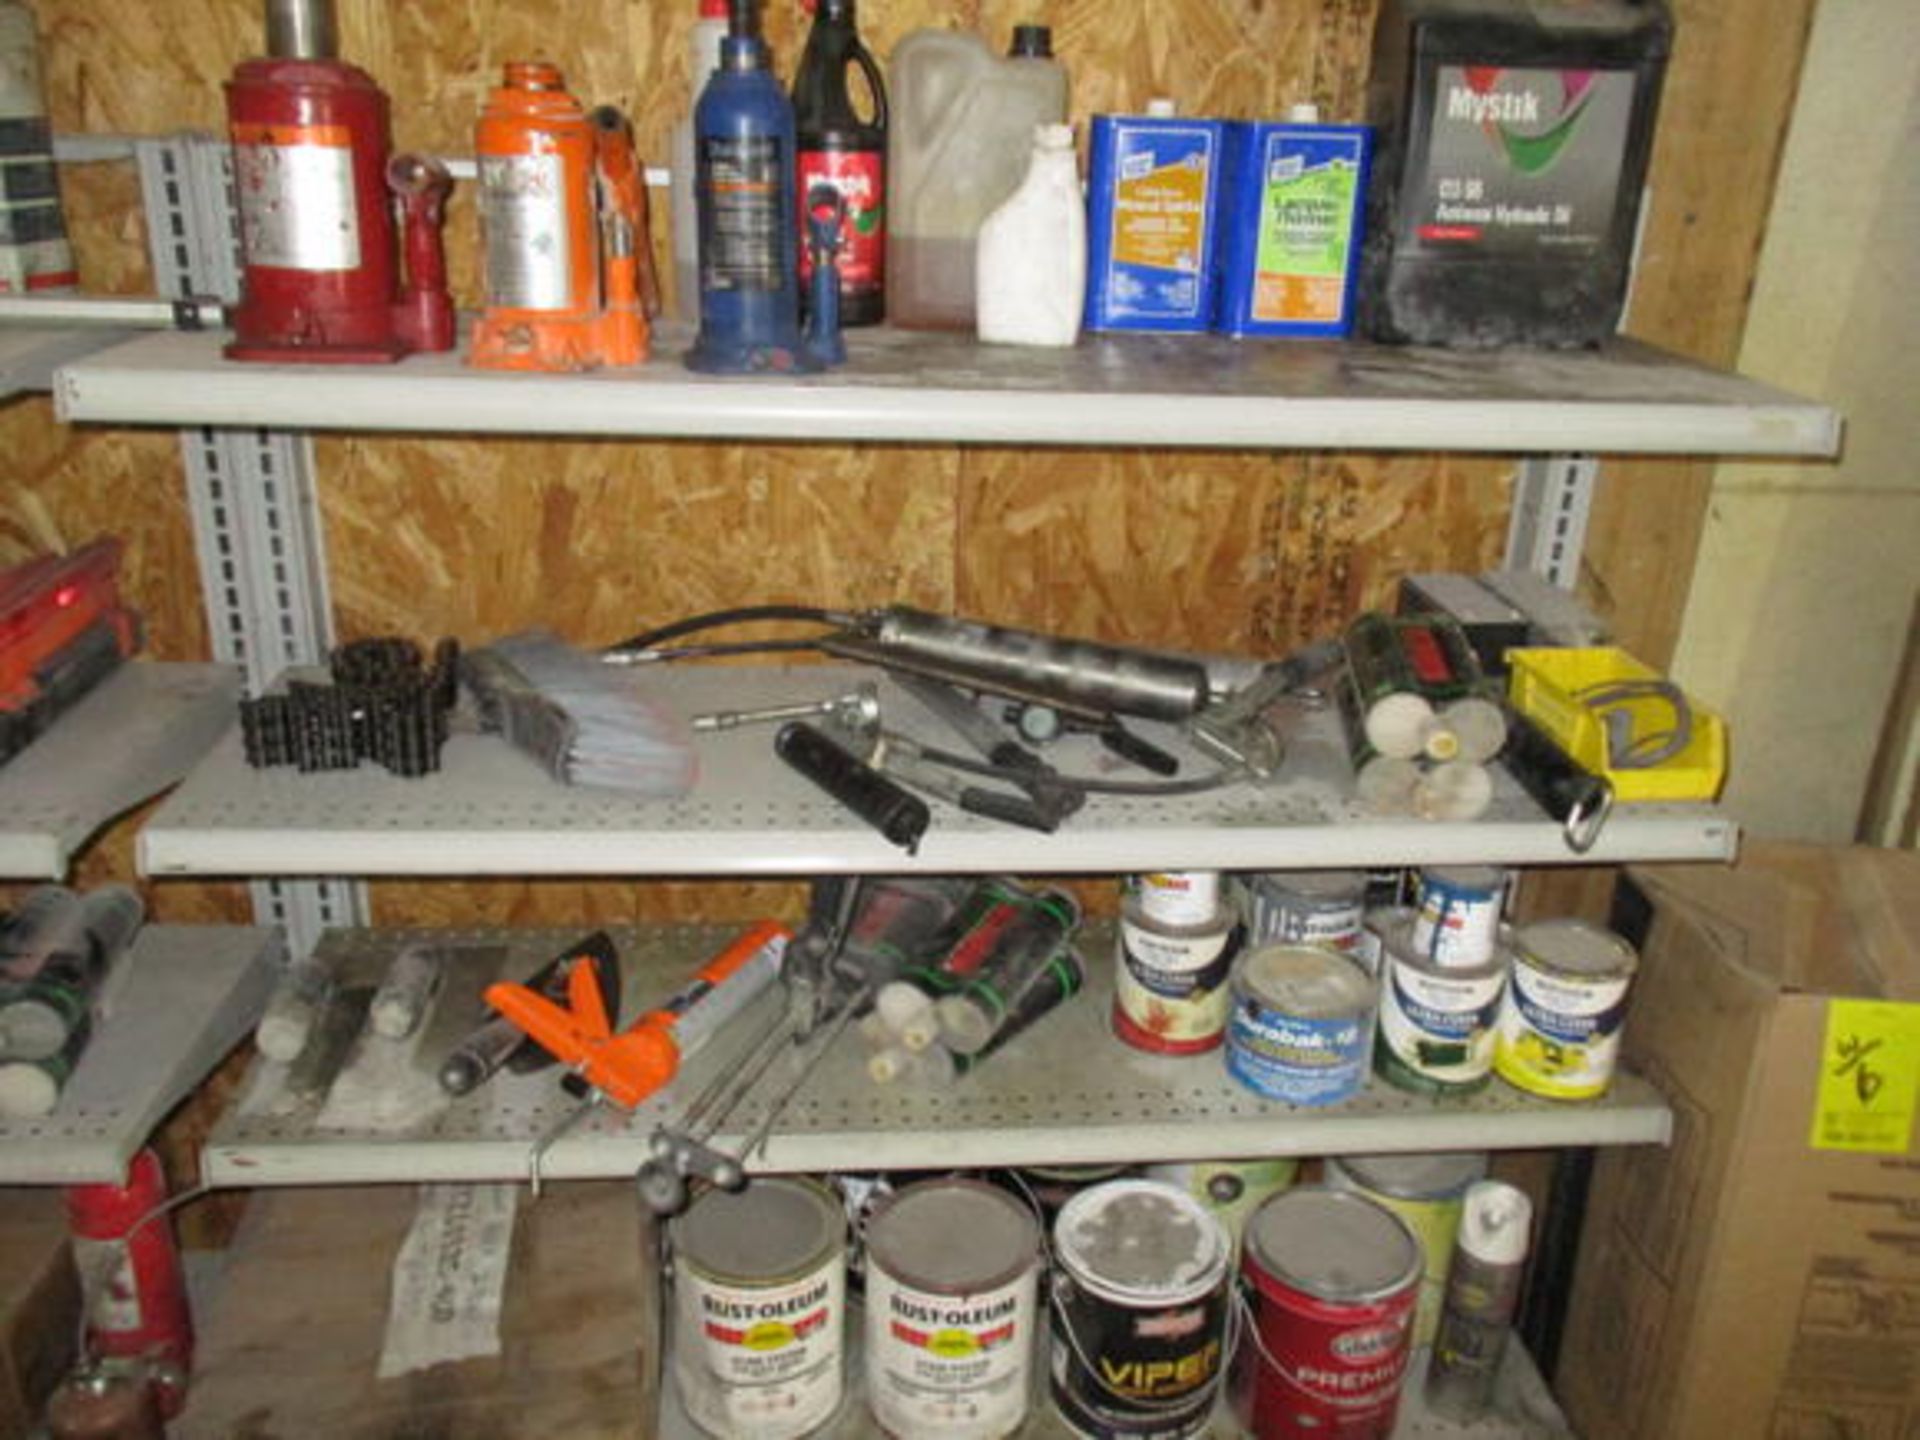 ASSORT TOOLS, PARTS W/ SHELVES IN (3) AREAS ALONG WALL - Image 4 of 10